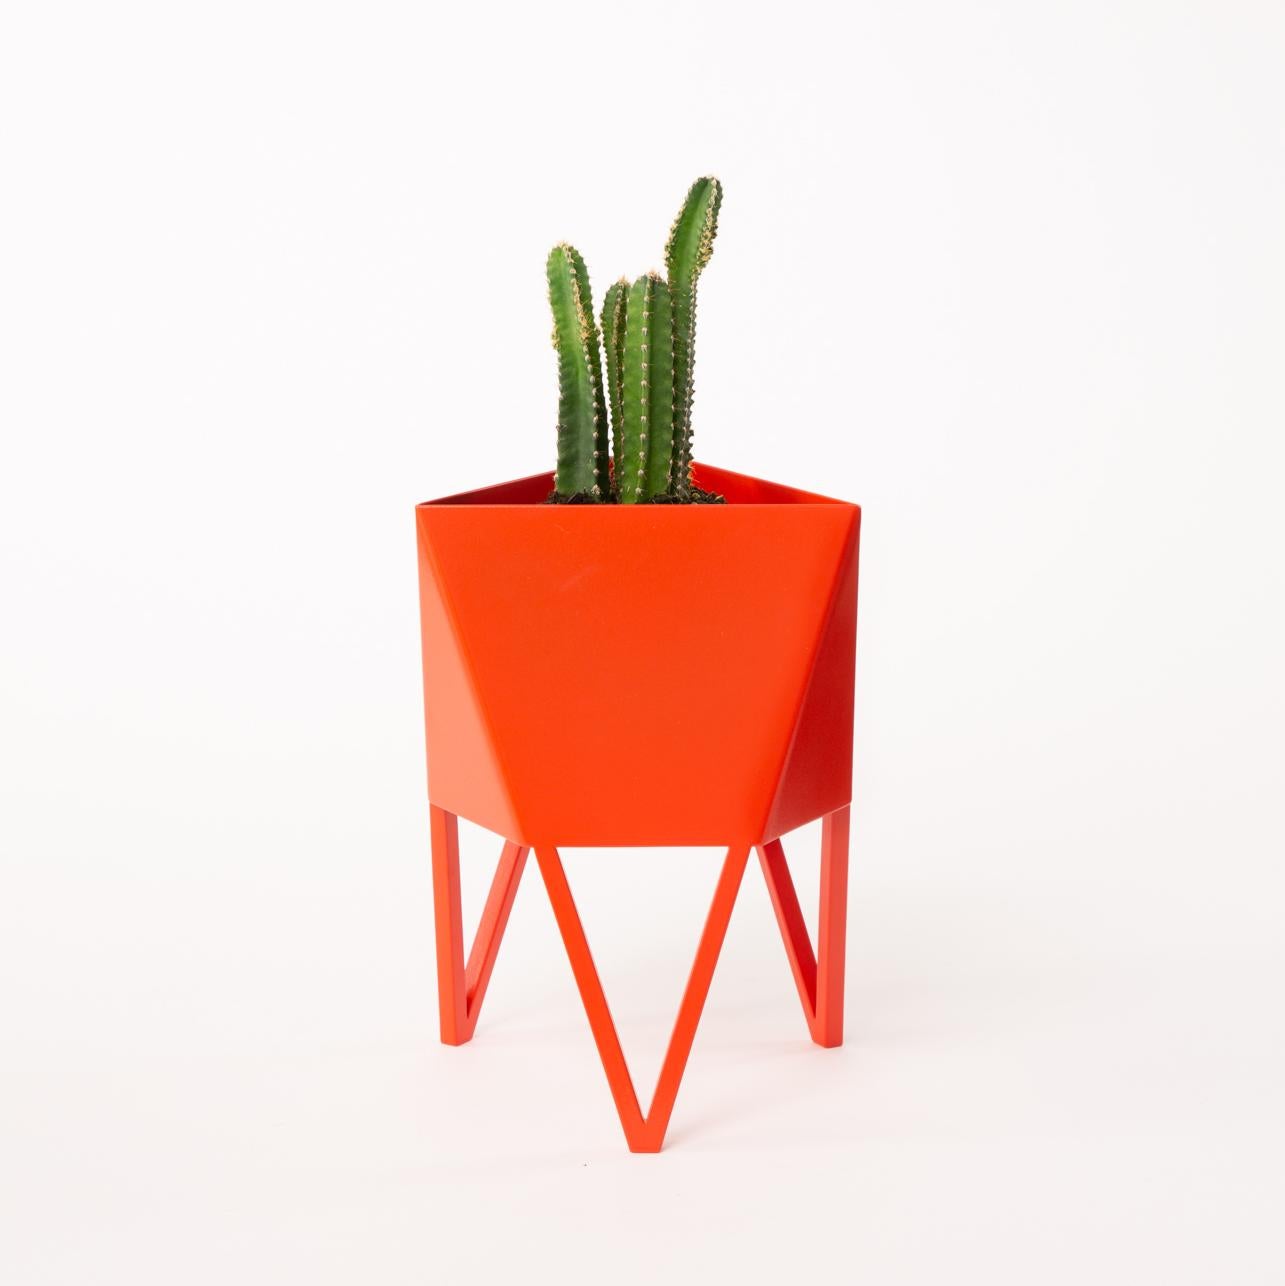 Faceted Deca Planter in Mars By Force/Collide, Size Small, 2023 For Sale